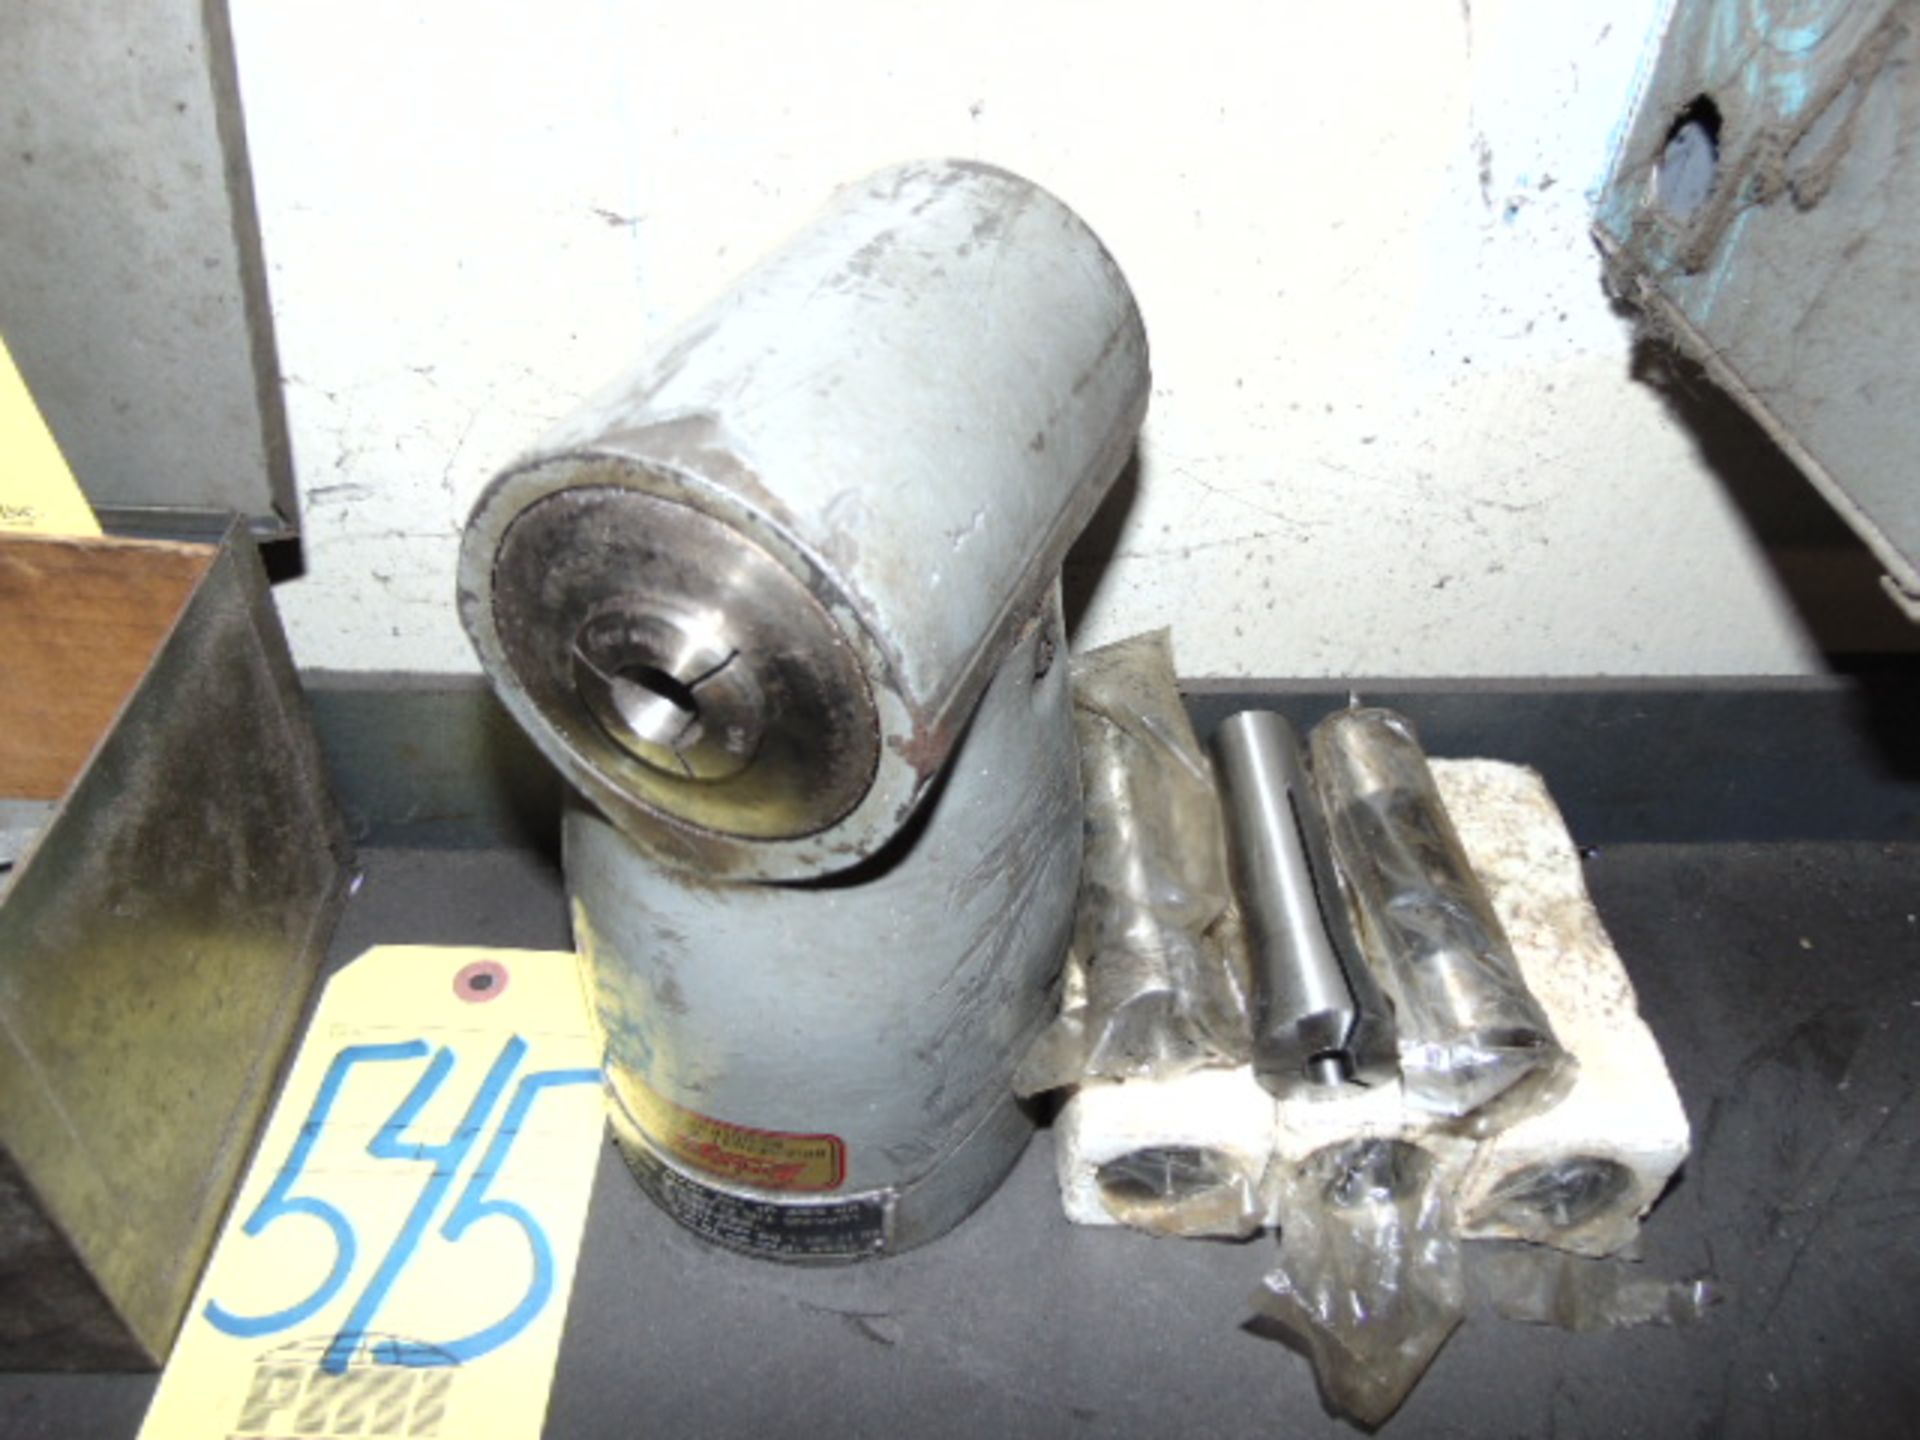 RIGHT ANGLE R08 MILLING ATTACHMENT, BRIDGEPORT, w/ collets